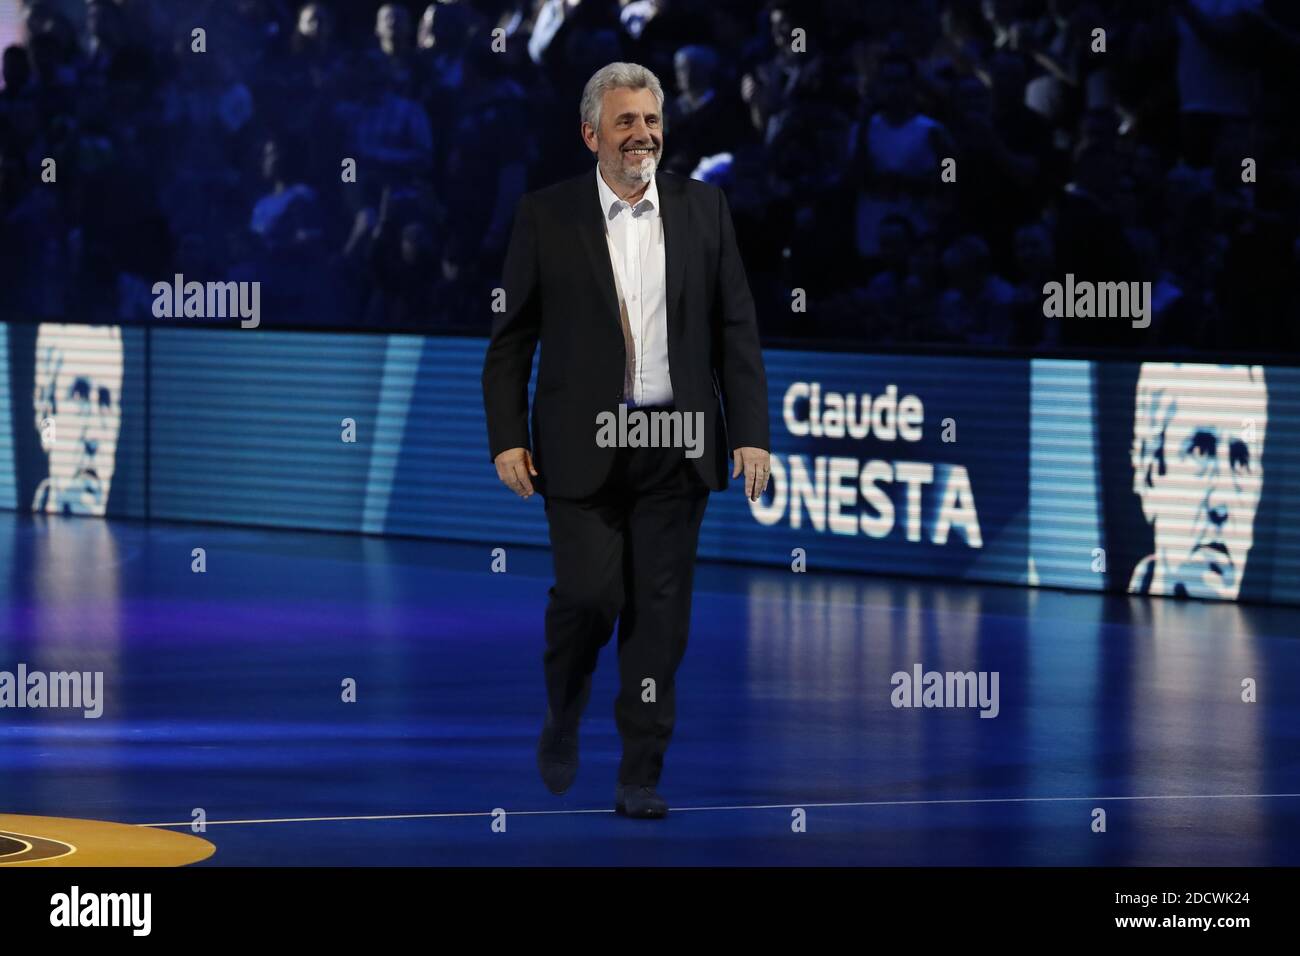 France's legendary coach Claude Onesta is presented to the crowd before the Golden League Handball game France vs Denmark in Accorhotels Arena, Paris, France on January 7th, 2018. Photo by Henri Szwarc/ABACAPRESS.COM Stock Photo